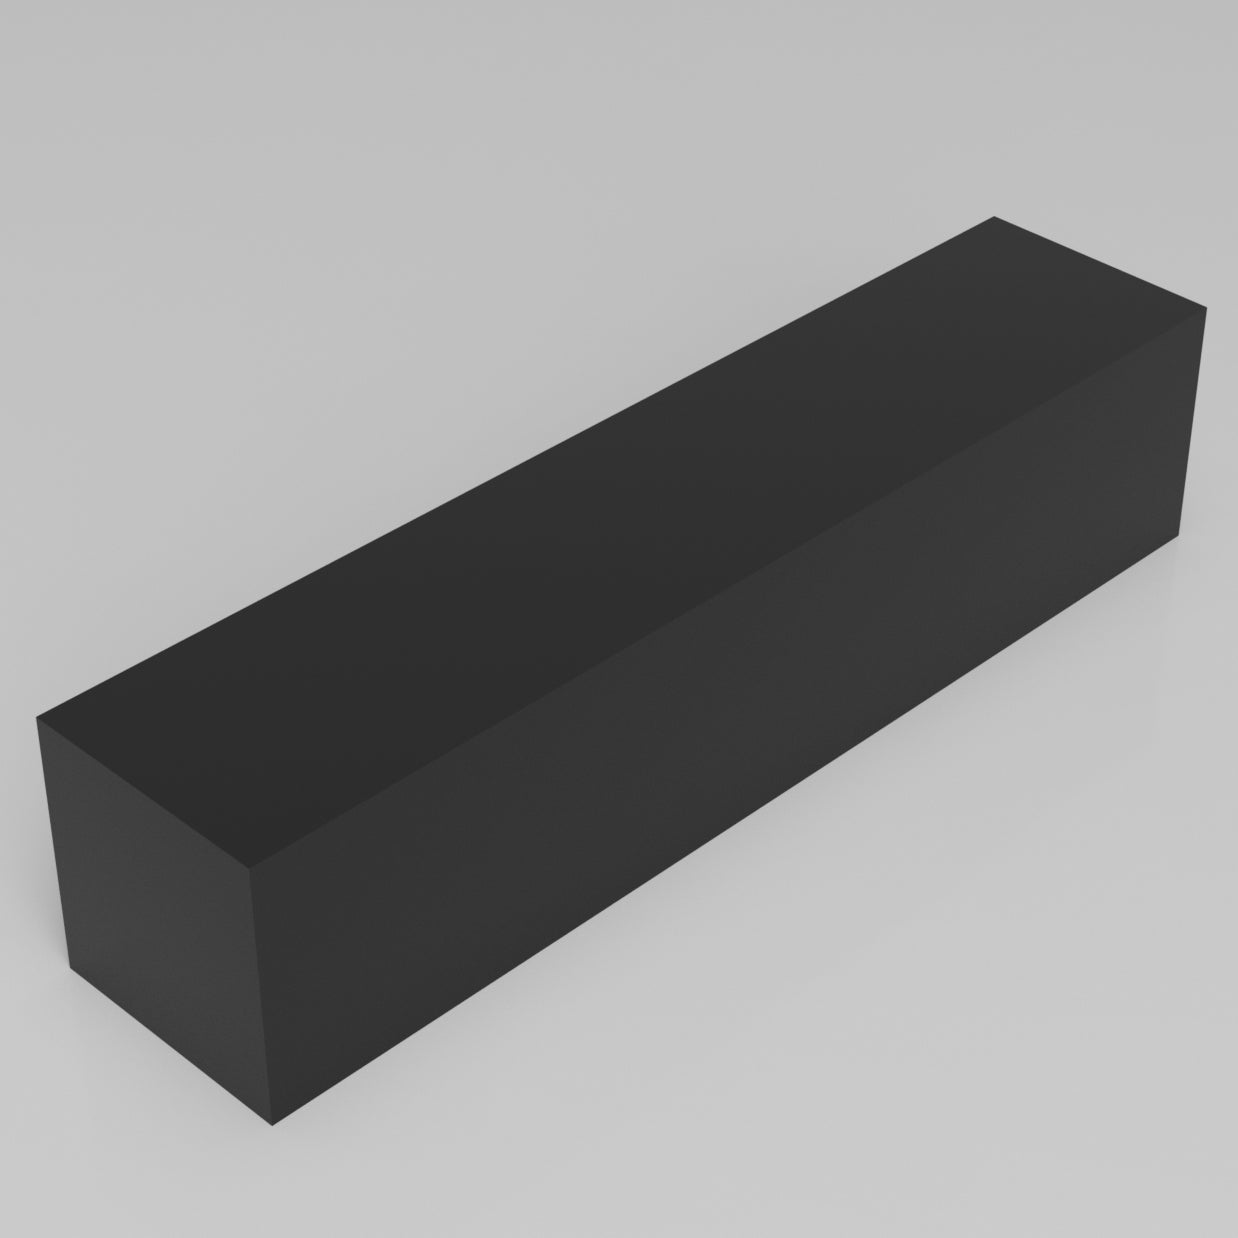 Machinable Wax Rectangular Block Front View 4 Inch by 4 Inch by 18 Inch